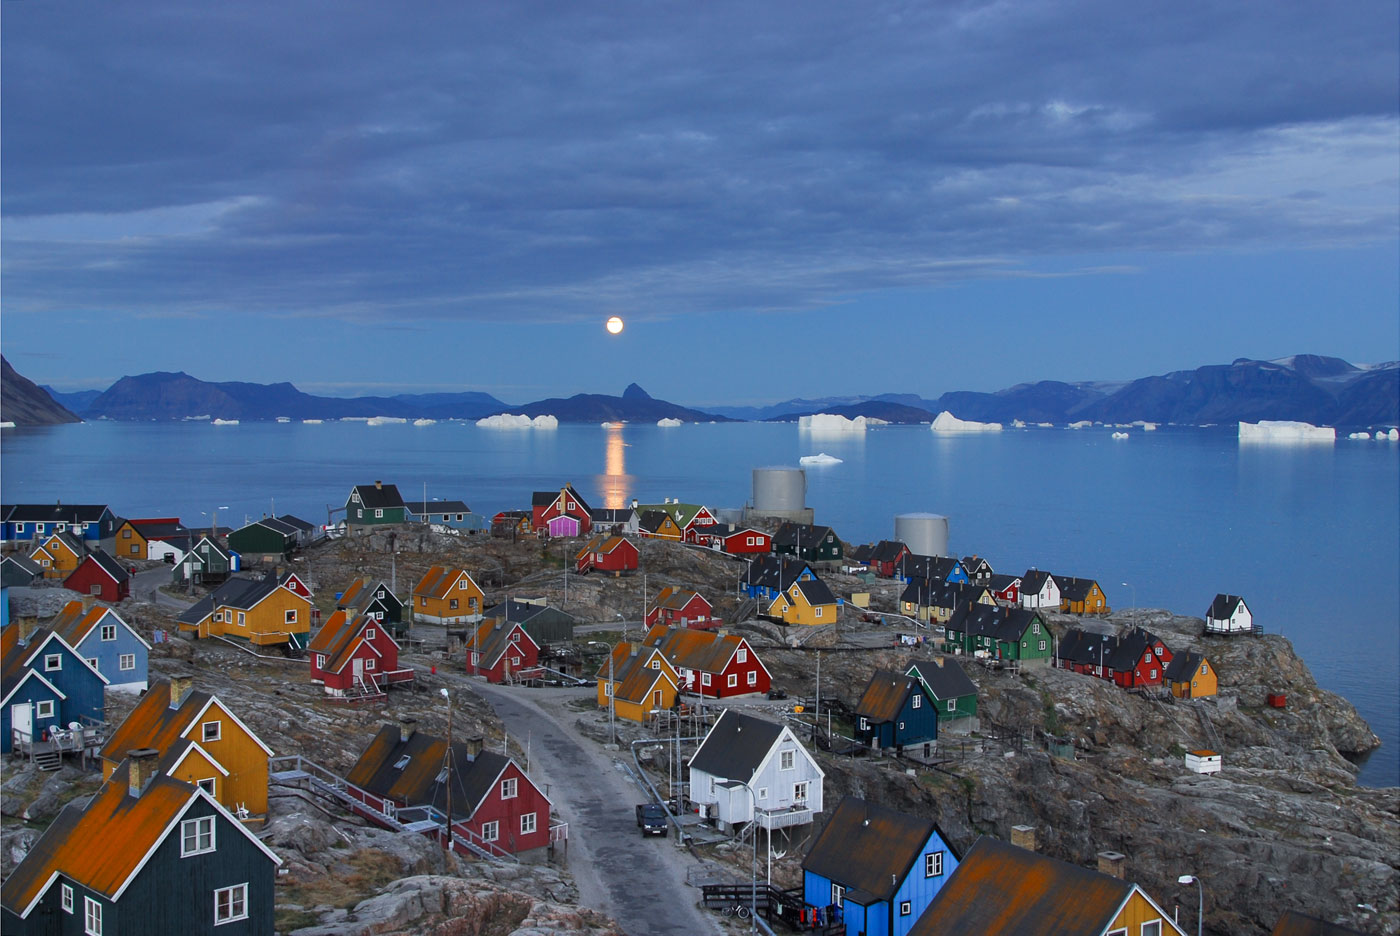 No. 4: Marvel at the moon rising behind the massiv icebergs and listen to the whining Huskies - Uummannaq, Greenland, 2007